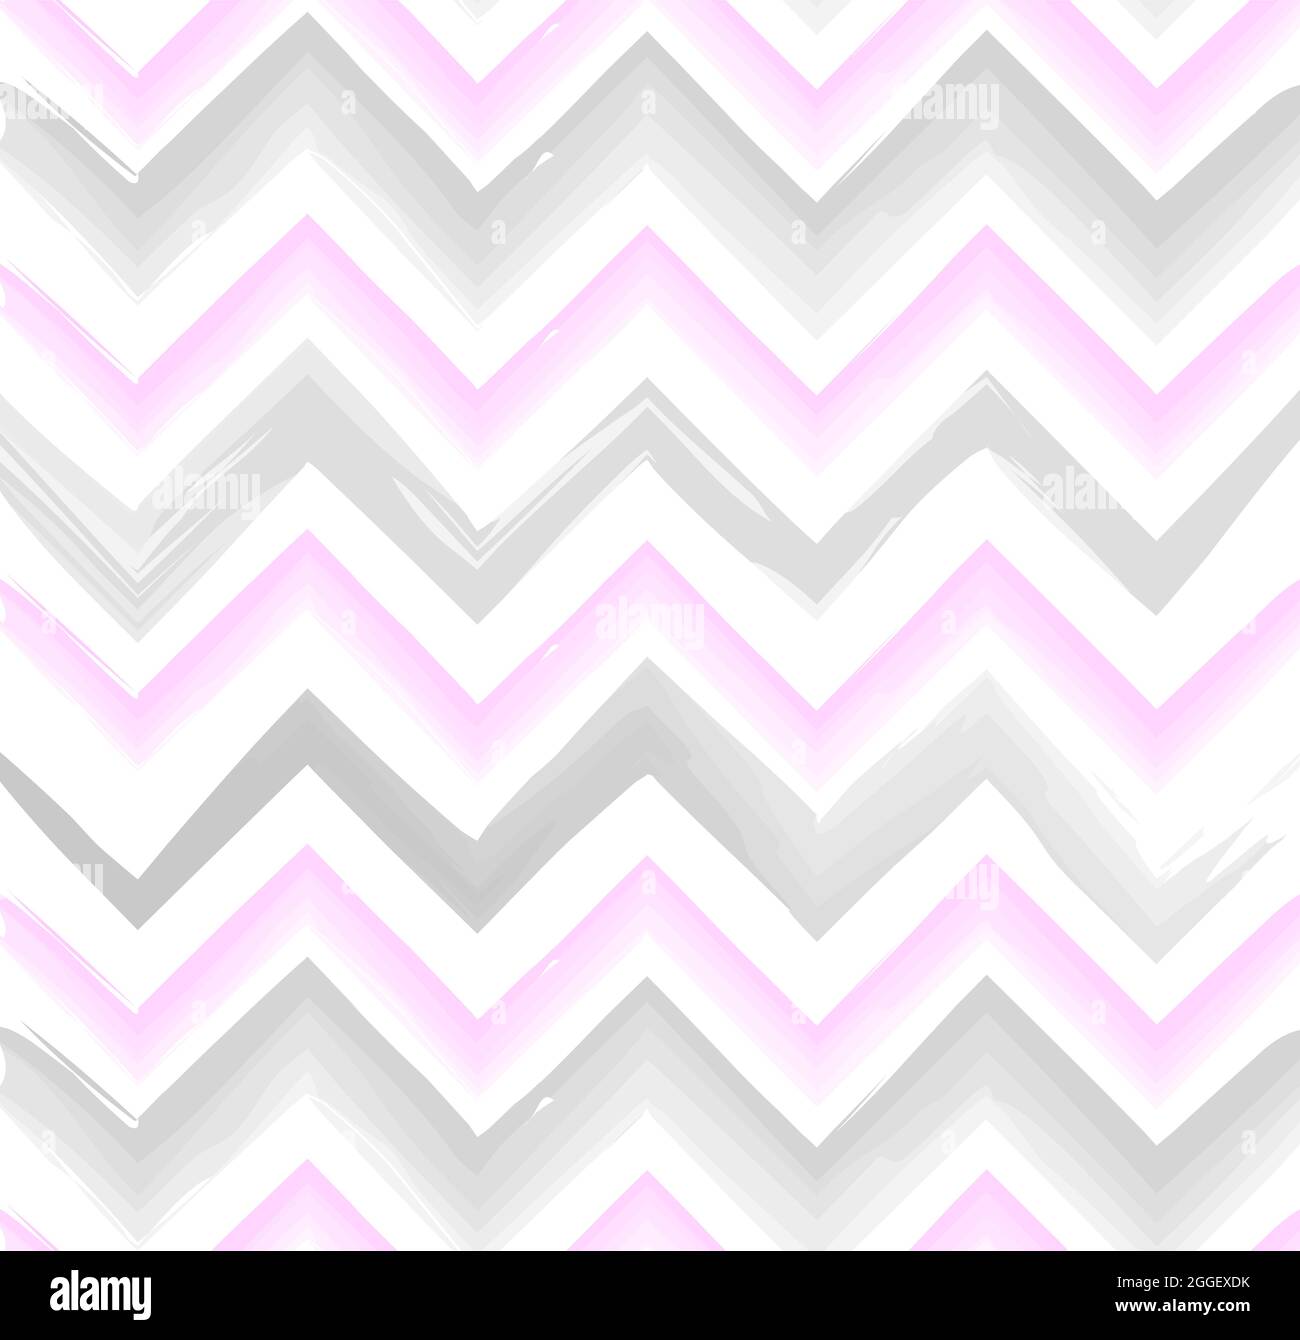 Pink and grey water color pattern vektor. Stock Vector